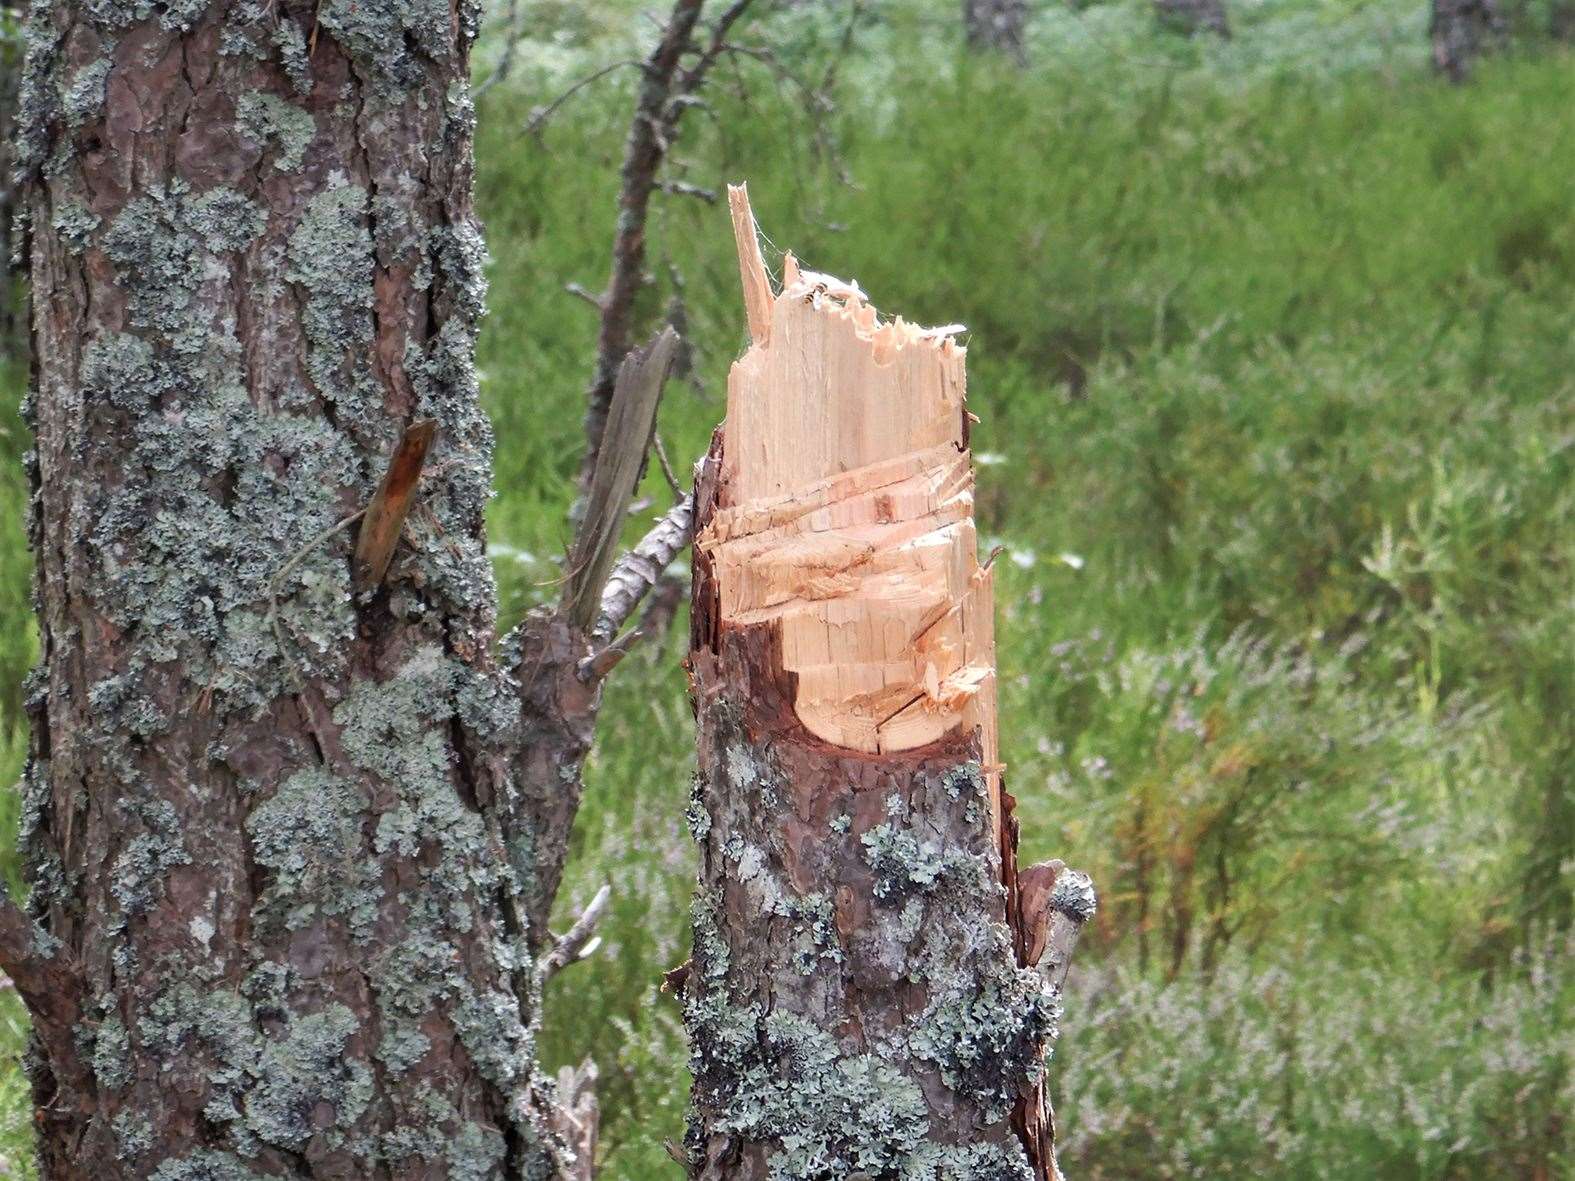 Live trees were chopped down in the Cairngorms National Park.